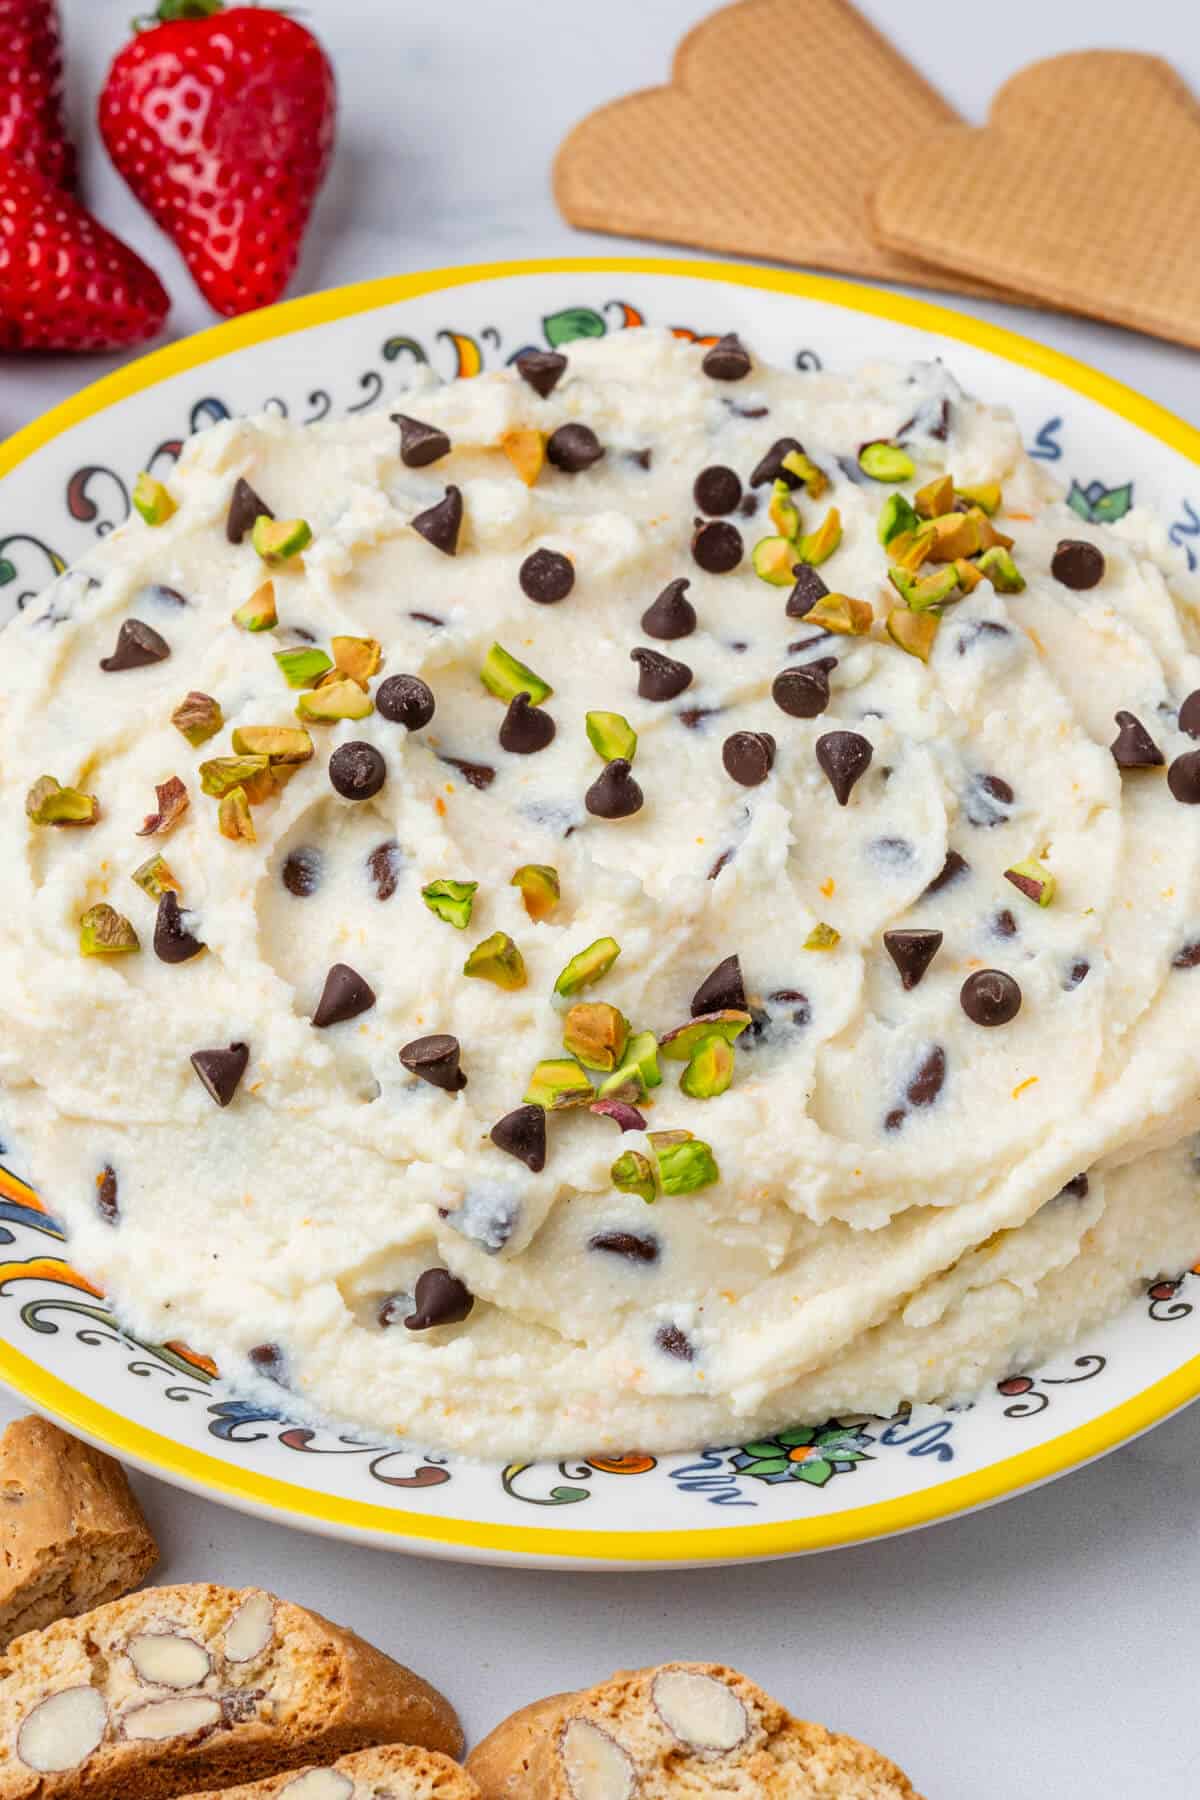 Cannoli dip with chopped pistachios and choc chips on top